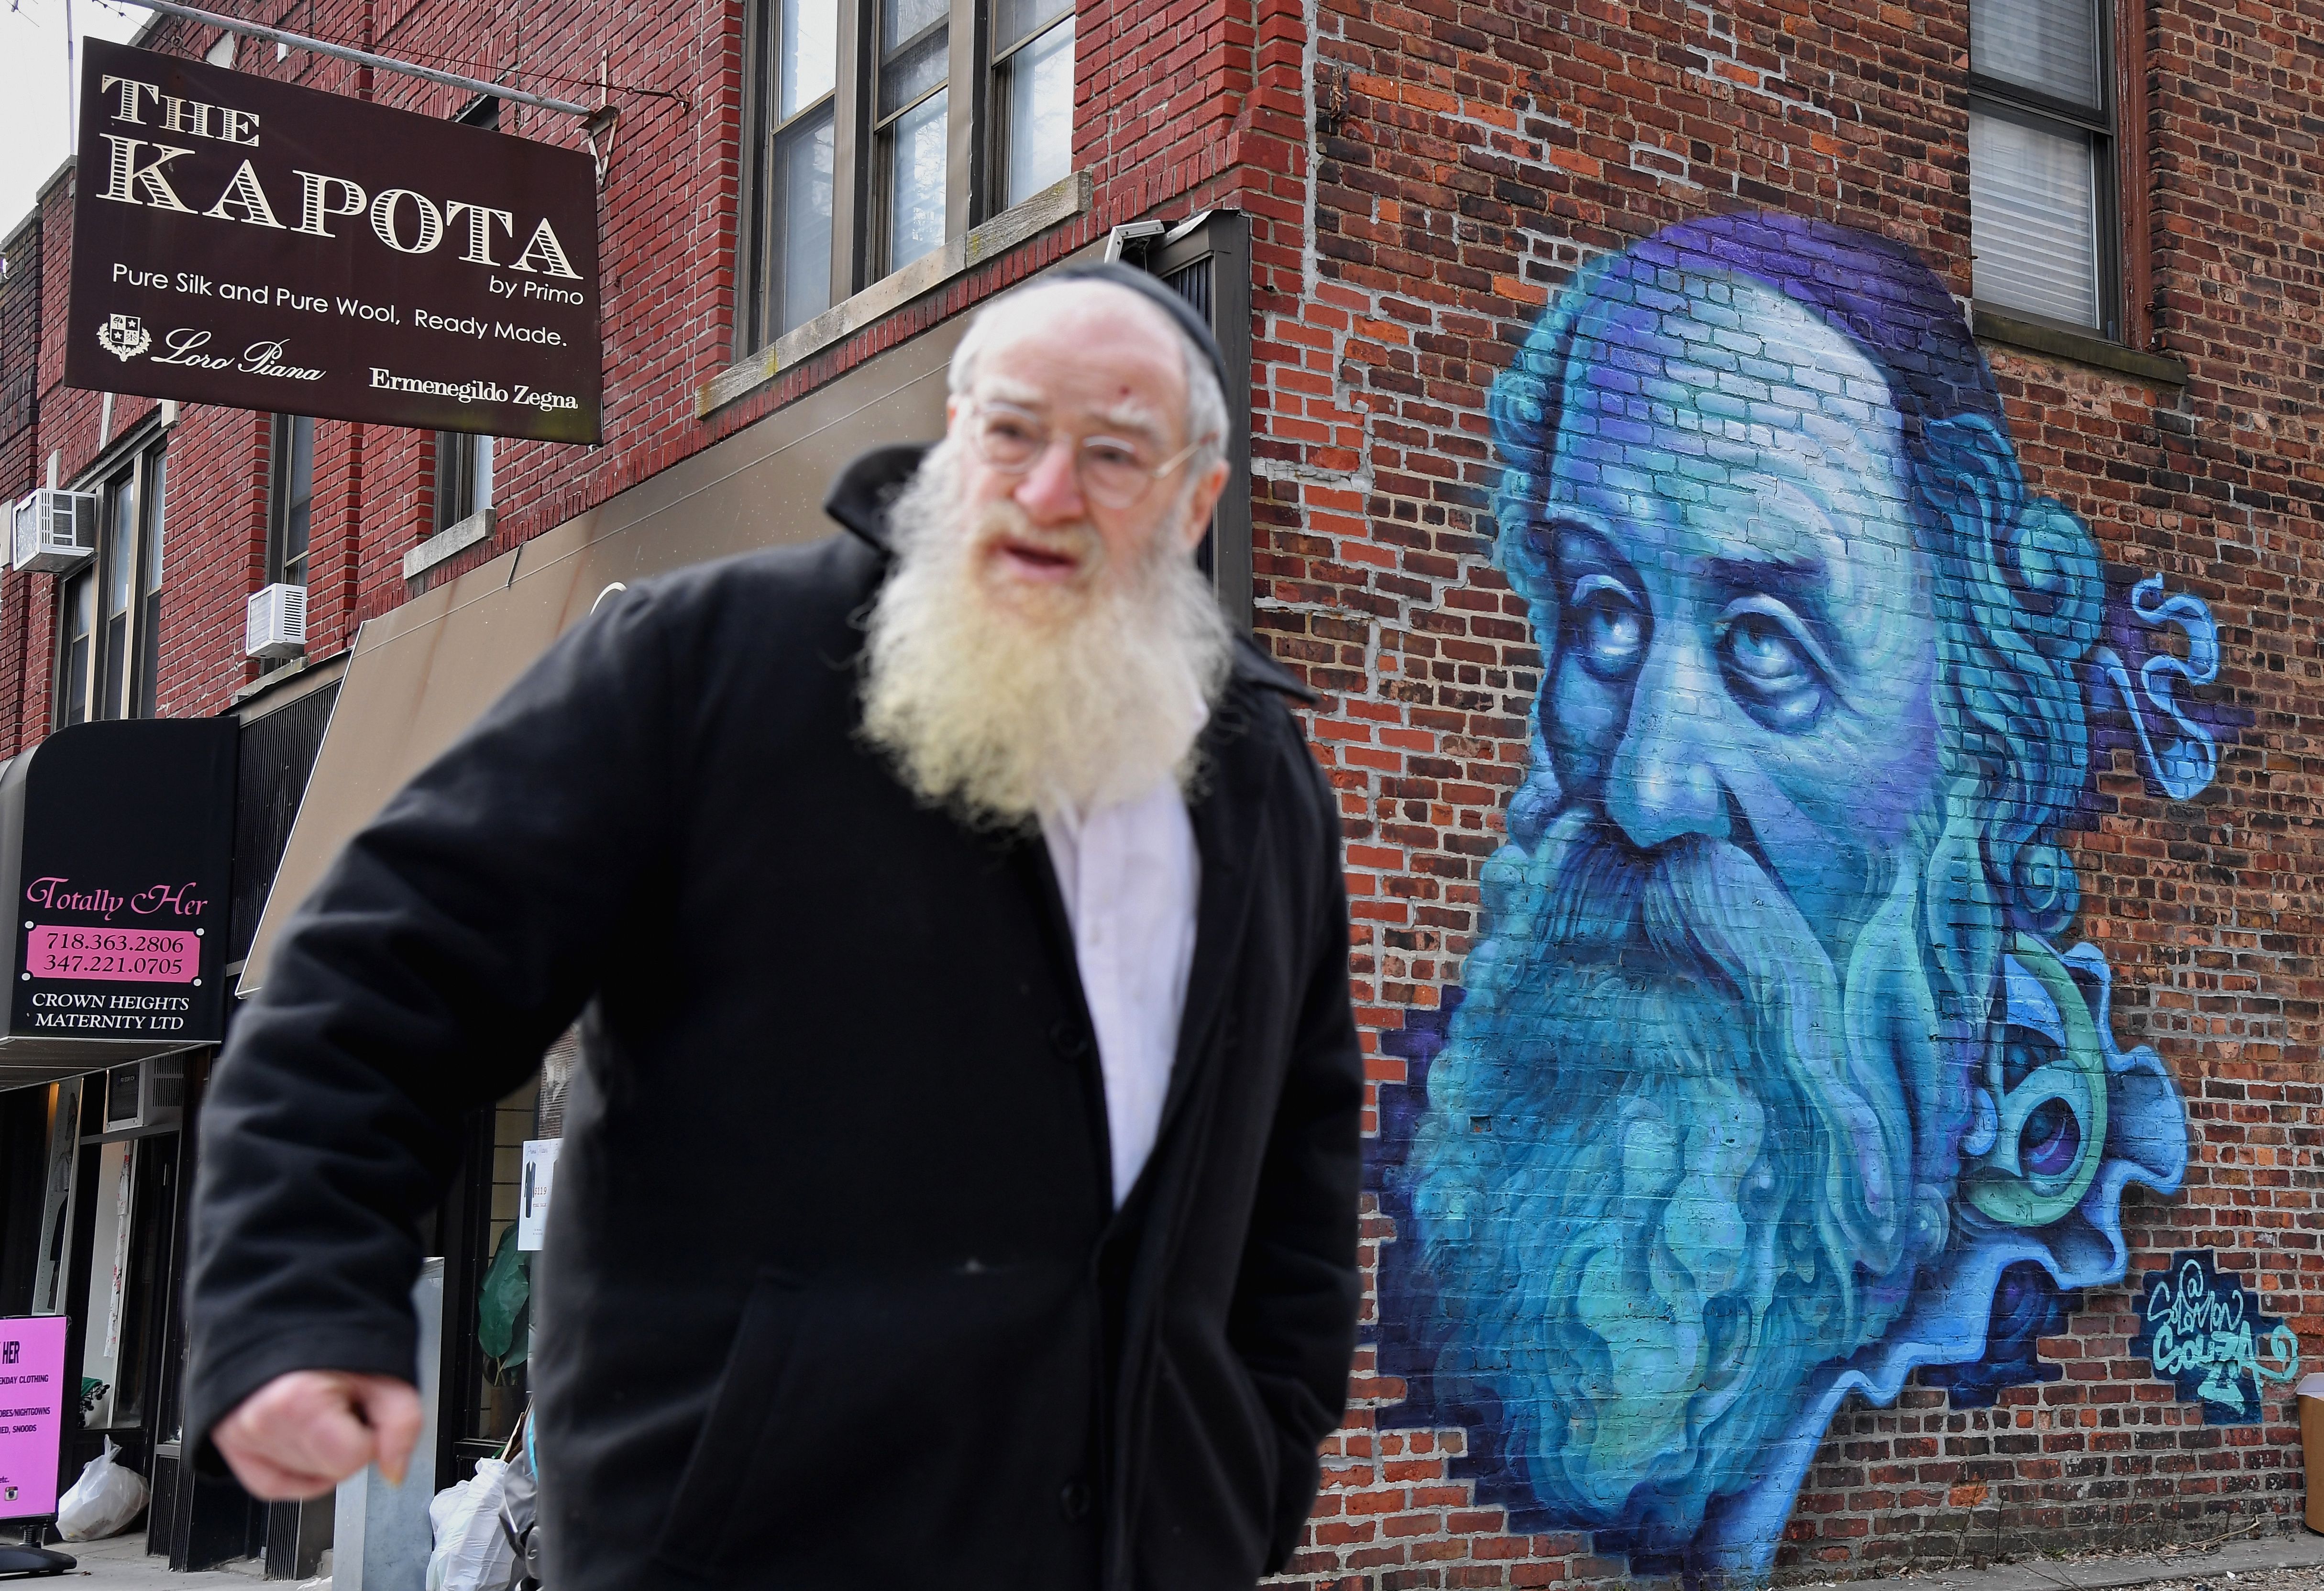 An Orthodox Jewish man walks past a mural of Alter Rebbe, the founder of Chabad Chassidus, by graffiti artist Salomon Souza in the Brooklyn neighborhood of Crown Heights on February 27, 2019 in New York. - Crown Heights has experienced a surge in antisemitic attacks over the last months, all aimed at members of the Hasidic community. (Photo: ANGELA WEISS/AFP via Getty Images)